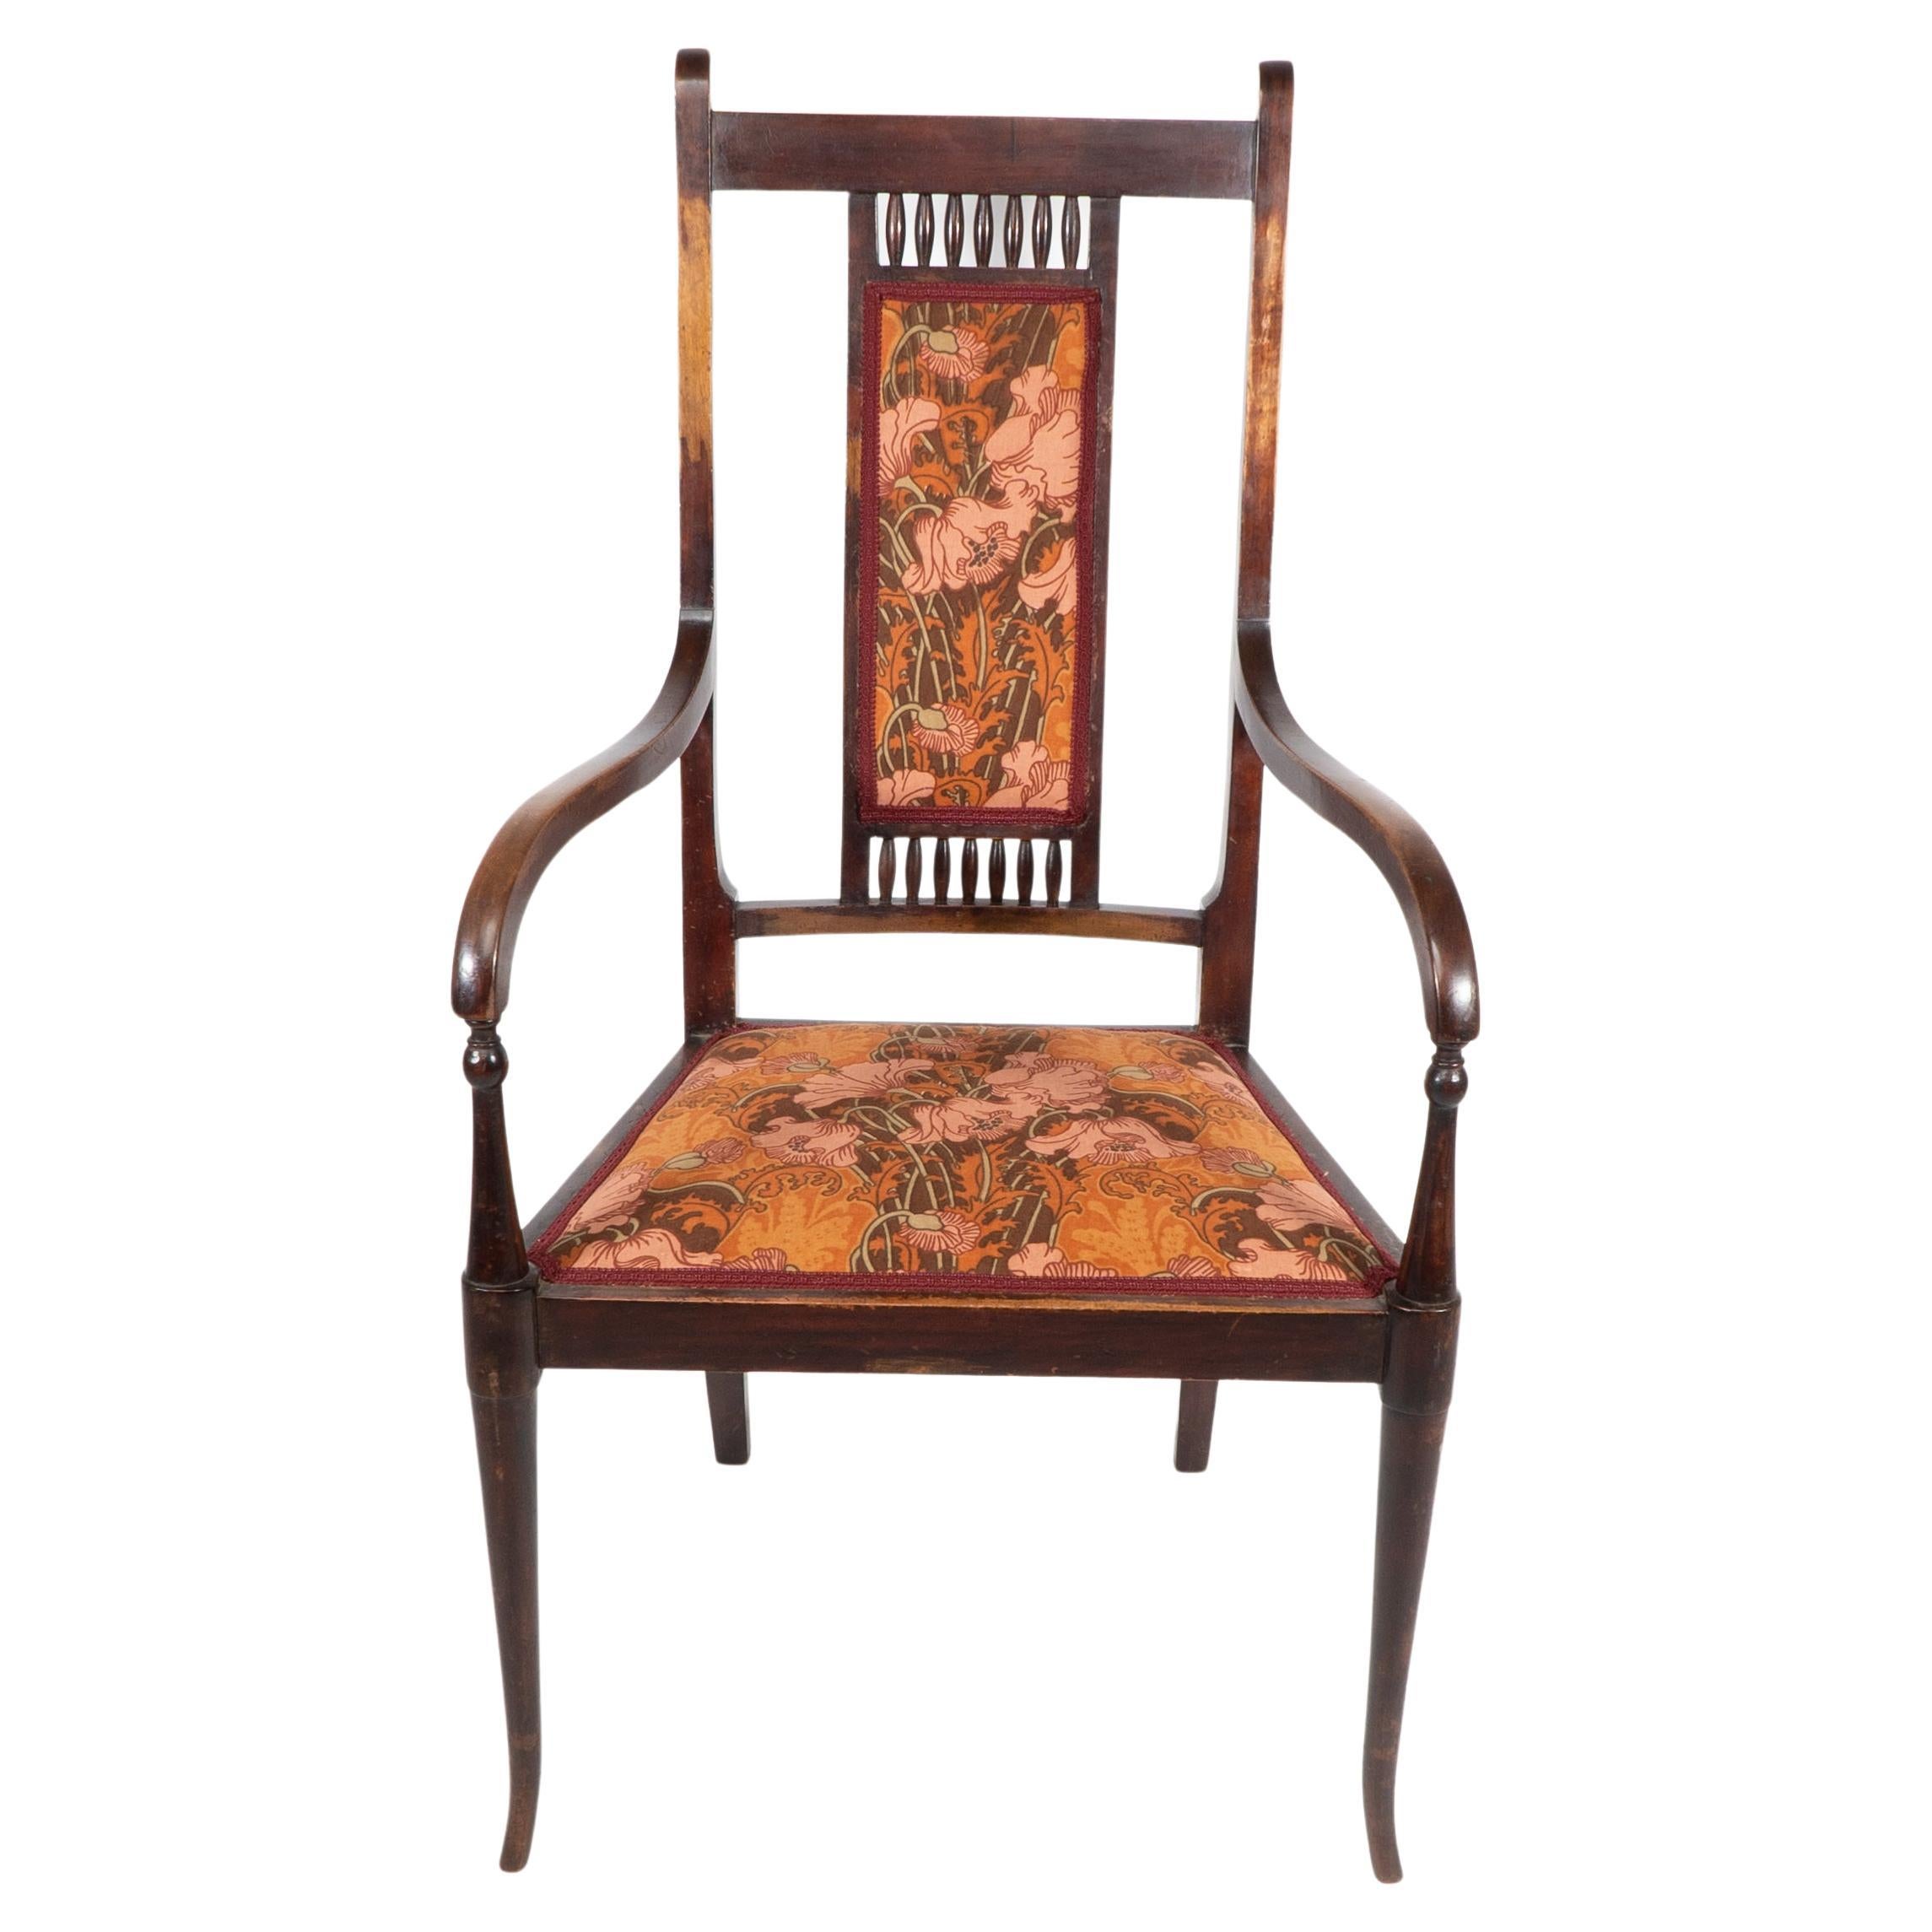 George Walton for John Rowntree's cafe & Miss Cranston tearooms.An Arts and Crafts walnut armchair. George Walton first designed this armchair which had a cane seat and back, around 1896, the year he began designing the interiors of fashionable tea